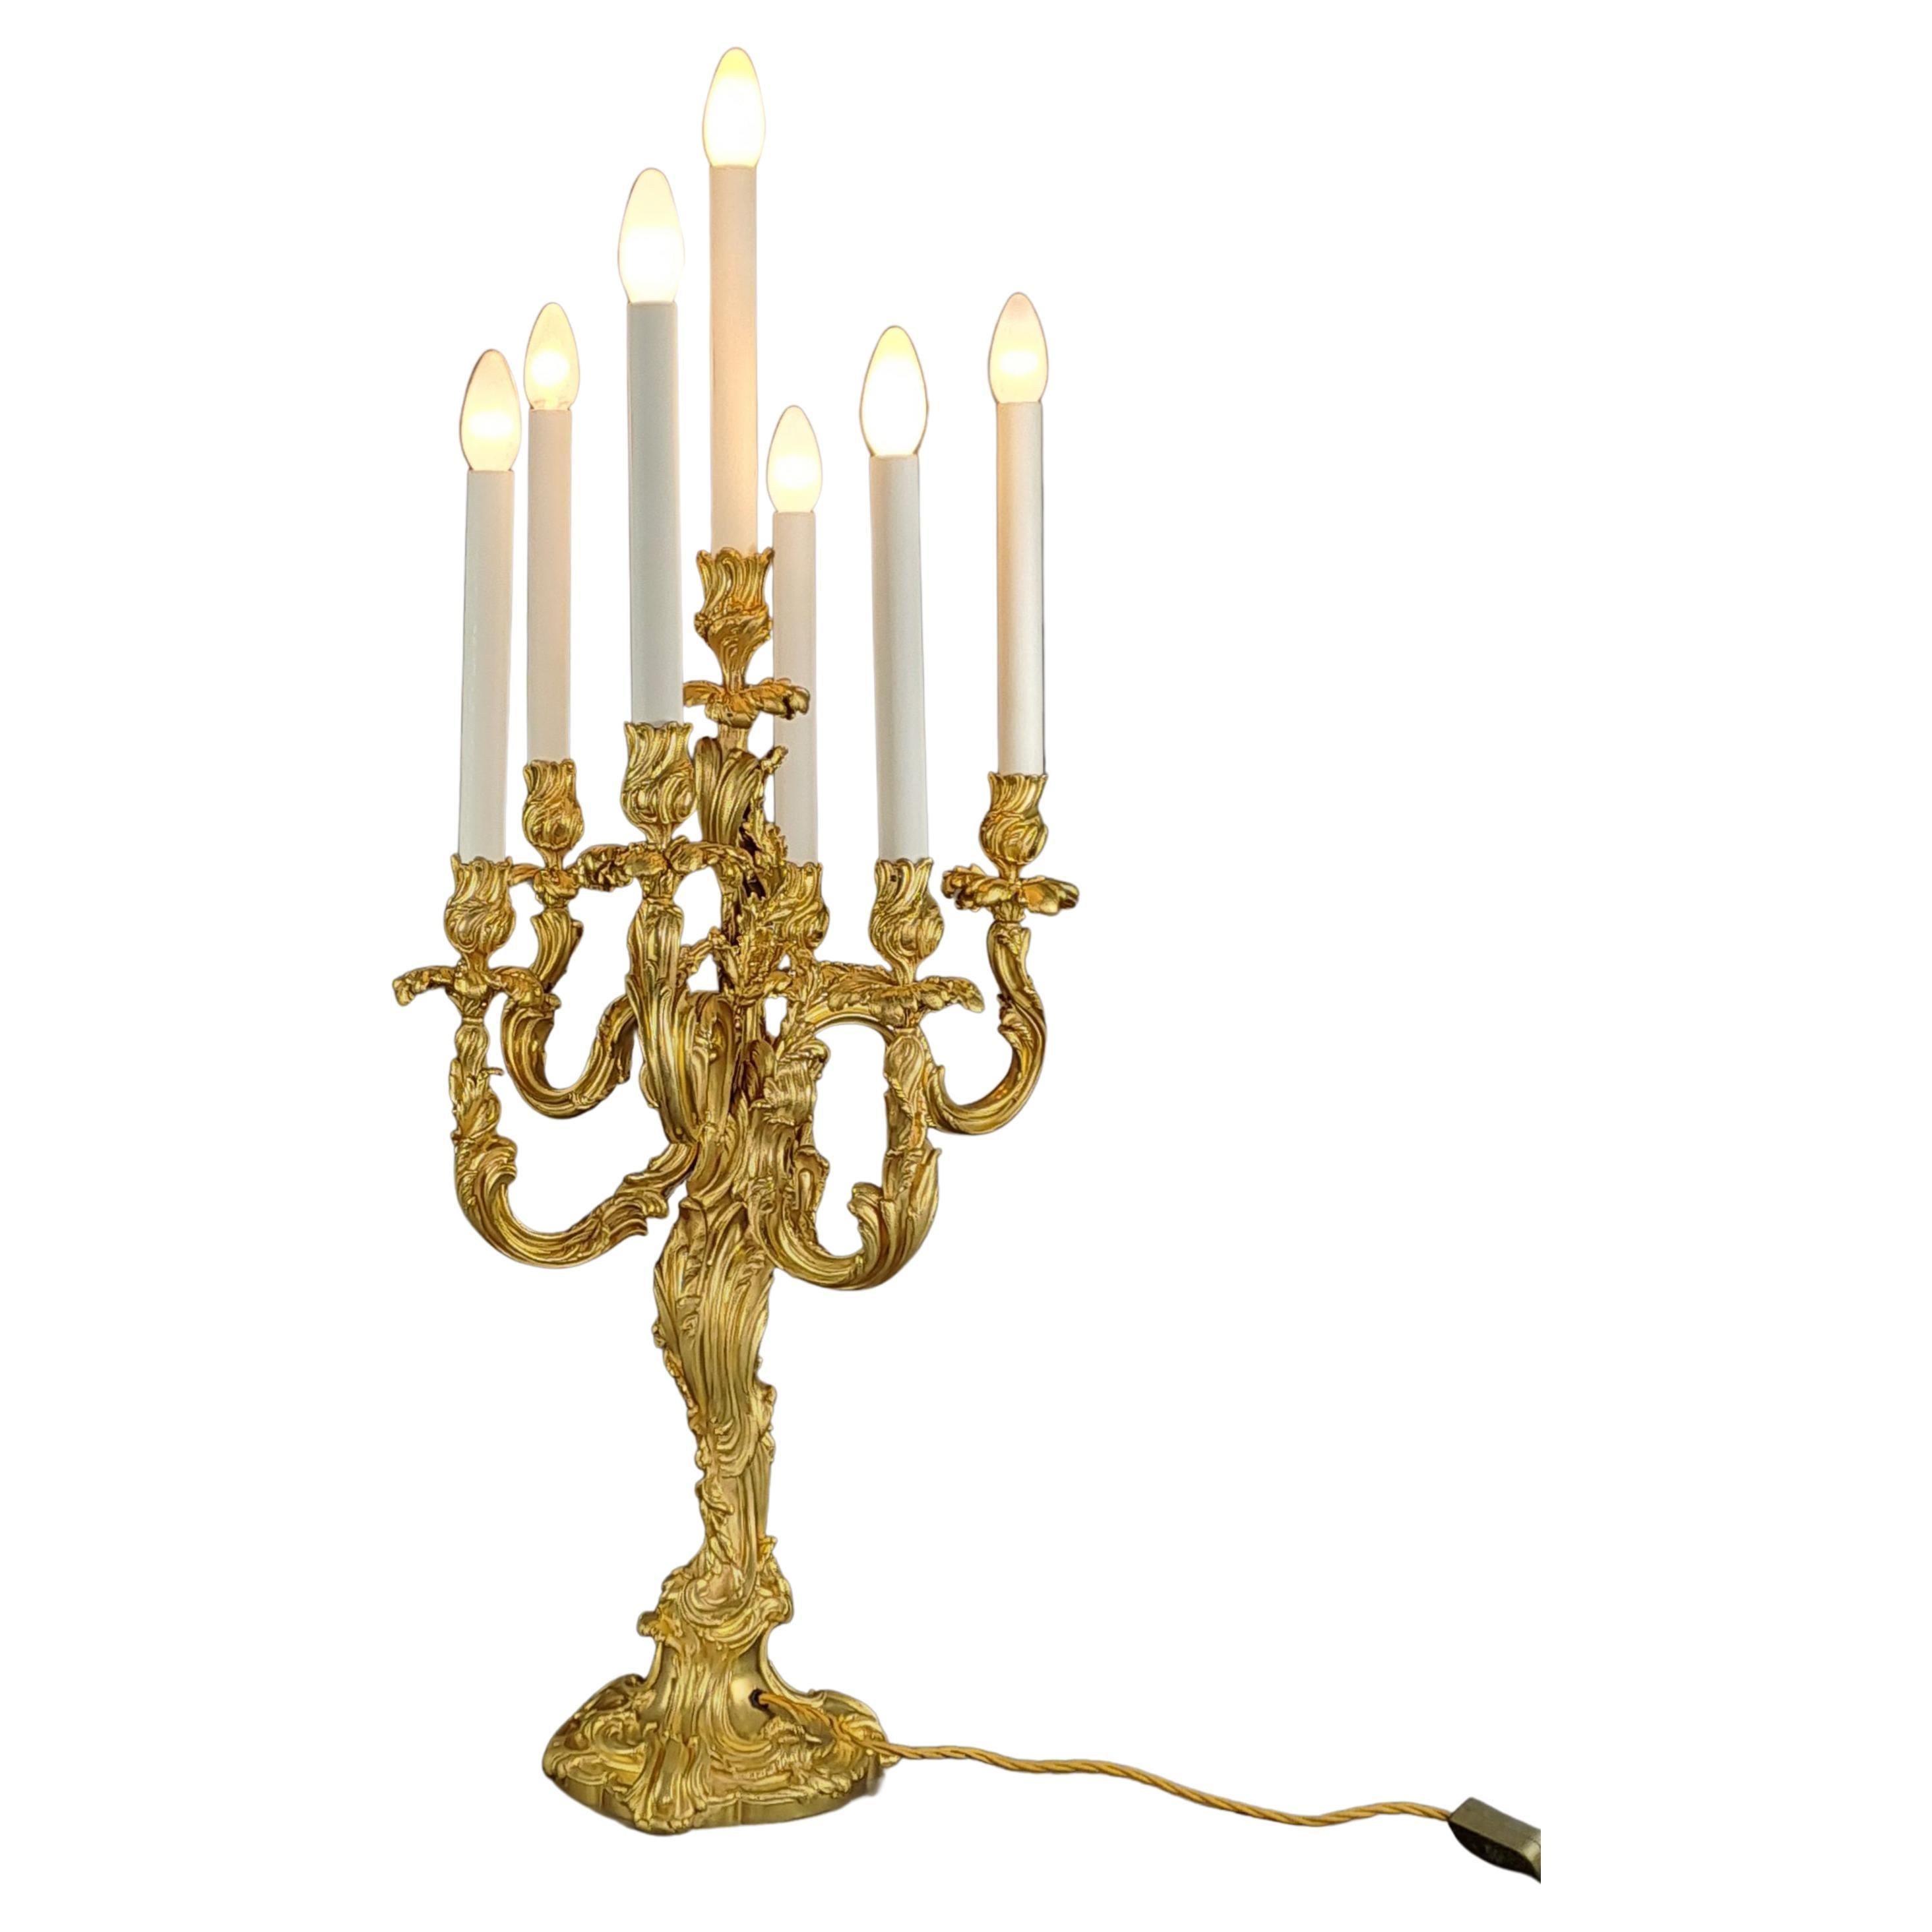 Important Rocaille Candelabra Mounted As A Lamp From Maison Millet In Paris